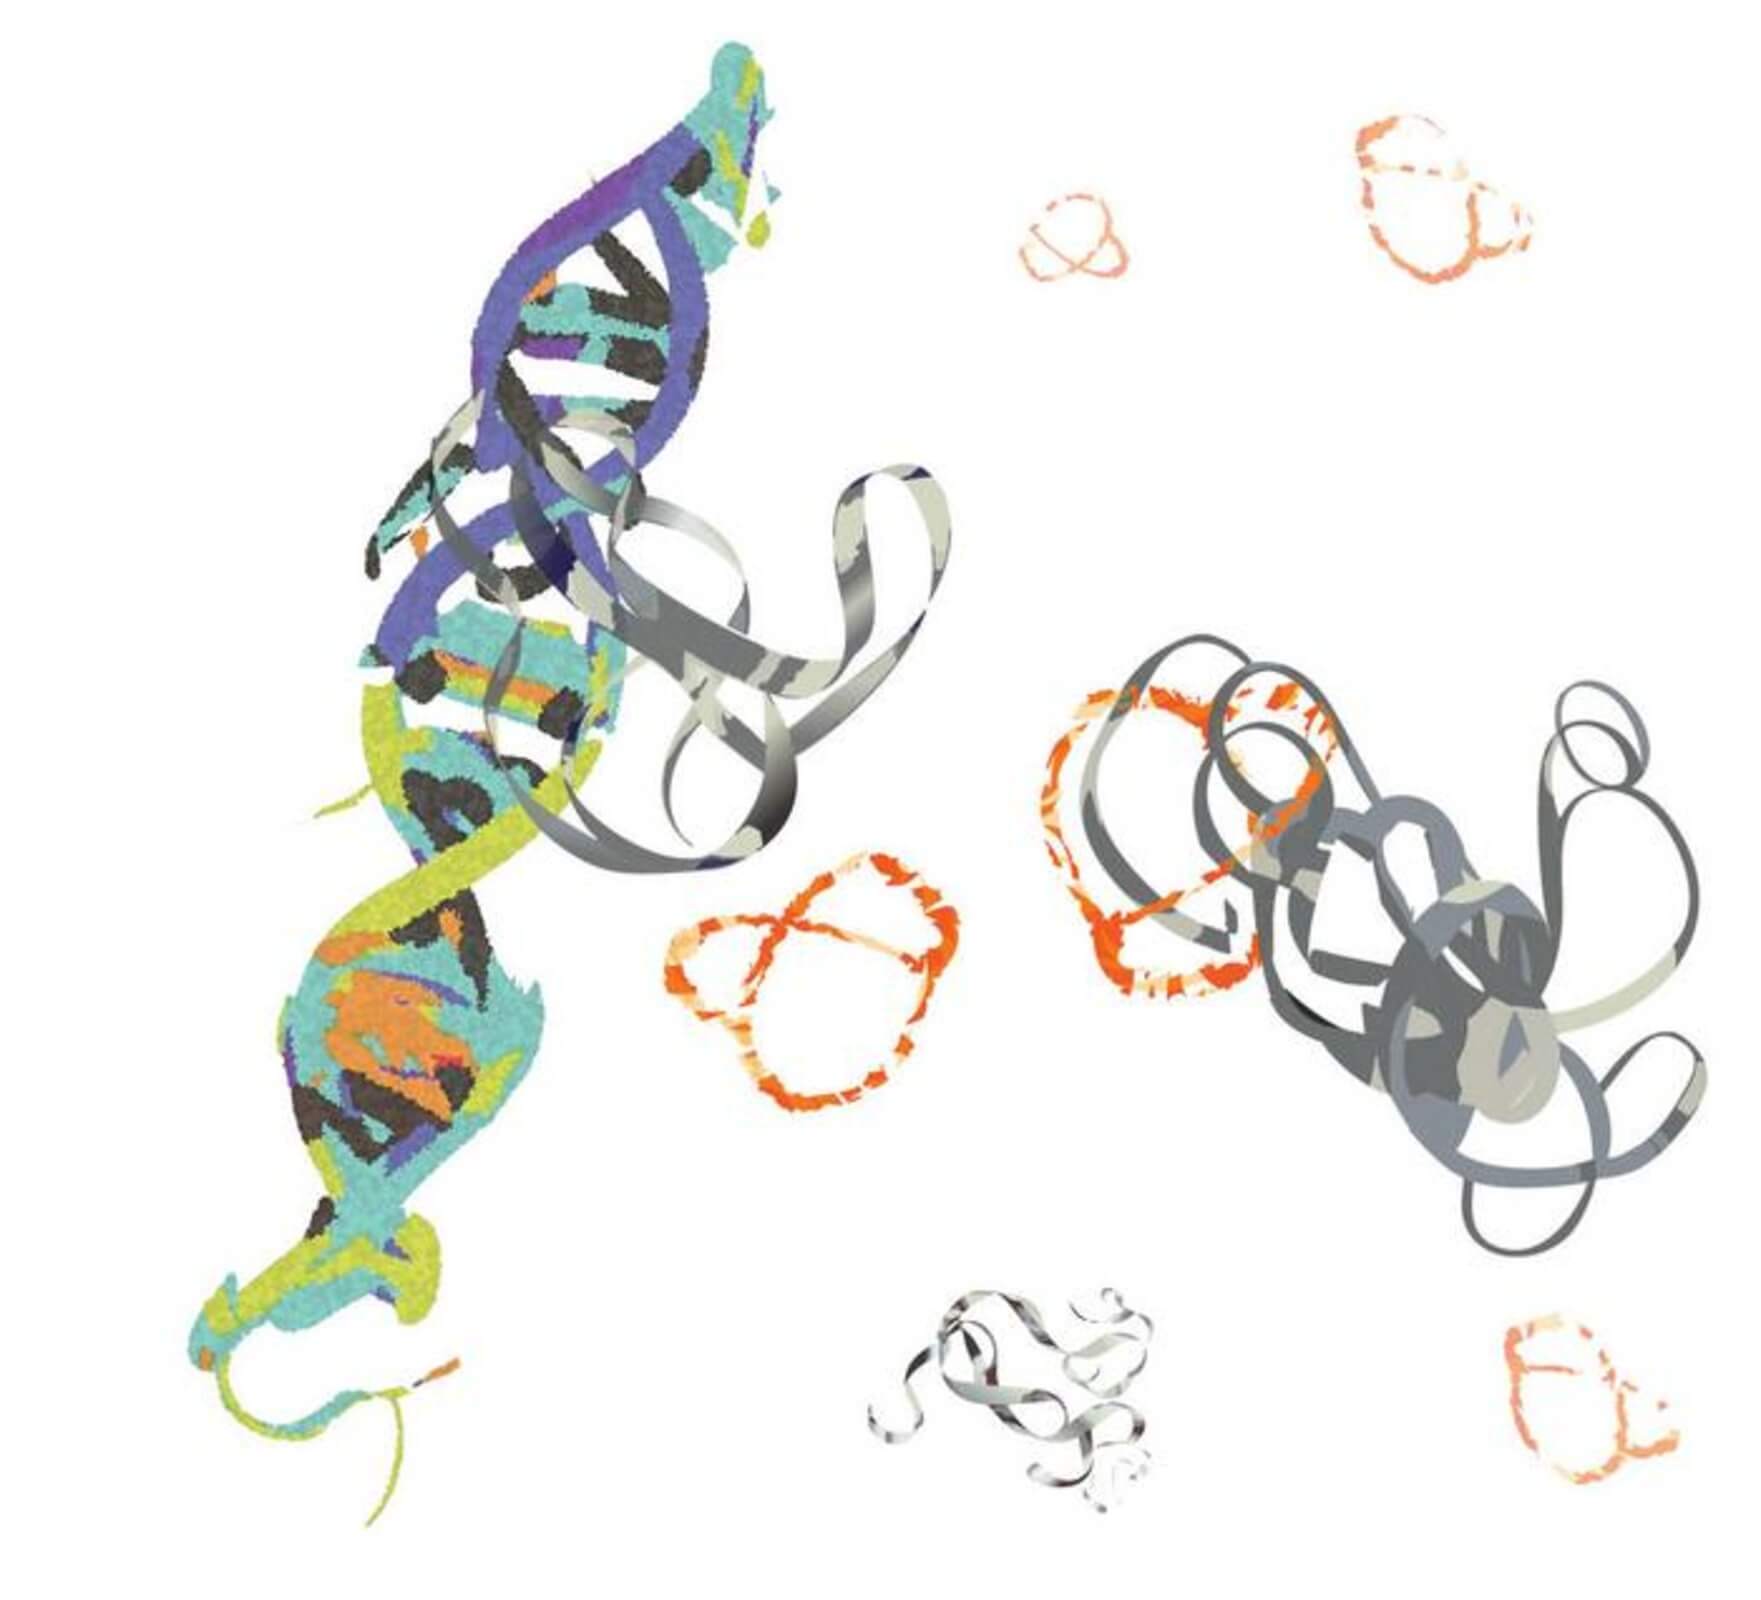 ​The MYC proteins (grey ribbons) bind to DNA and promote cancer progression